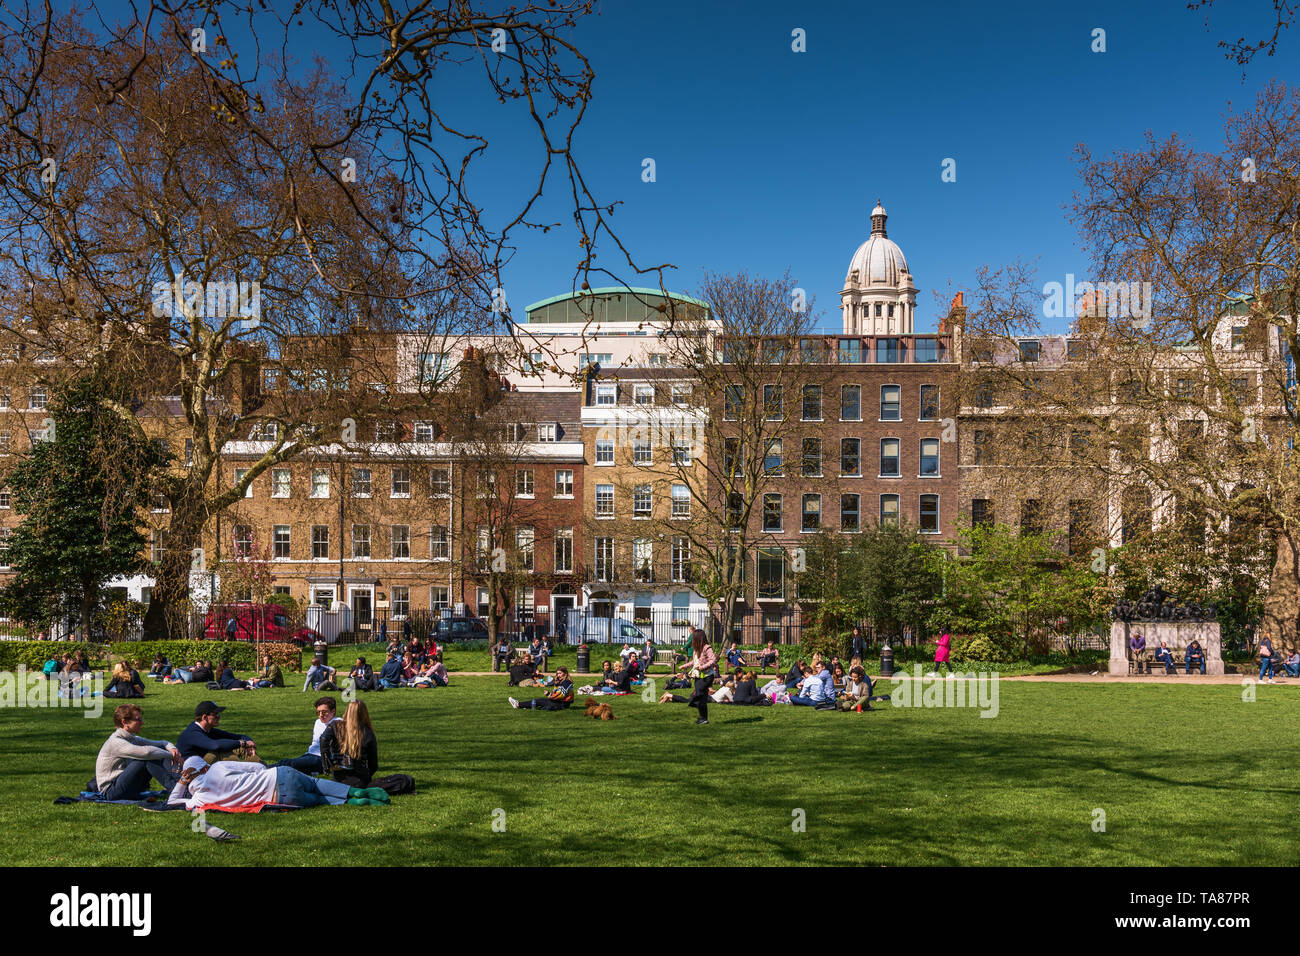 Lincoln's Inn Fields, London, UK Banque D'Images